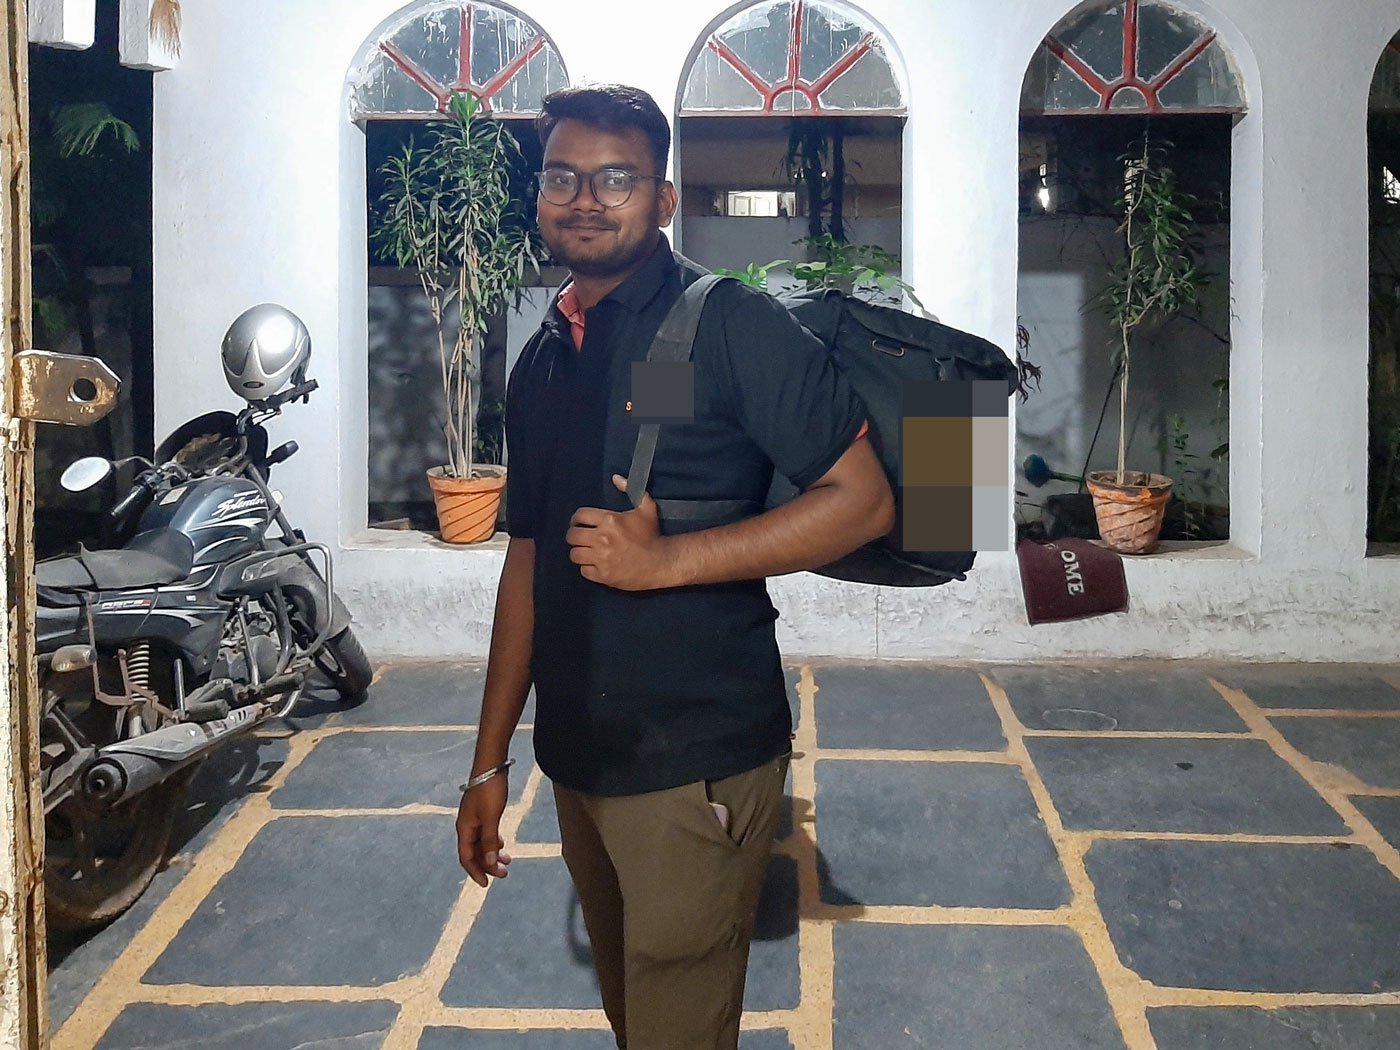 Sagar says, ‘I had to drop out after Class 10 [in Bilaspur]because of our financial situation. I decided to move to the city [Raipur] and start working’